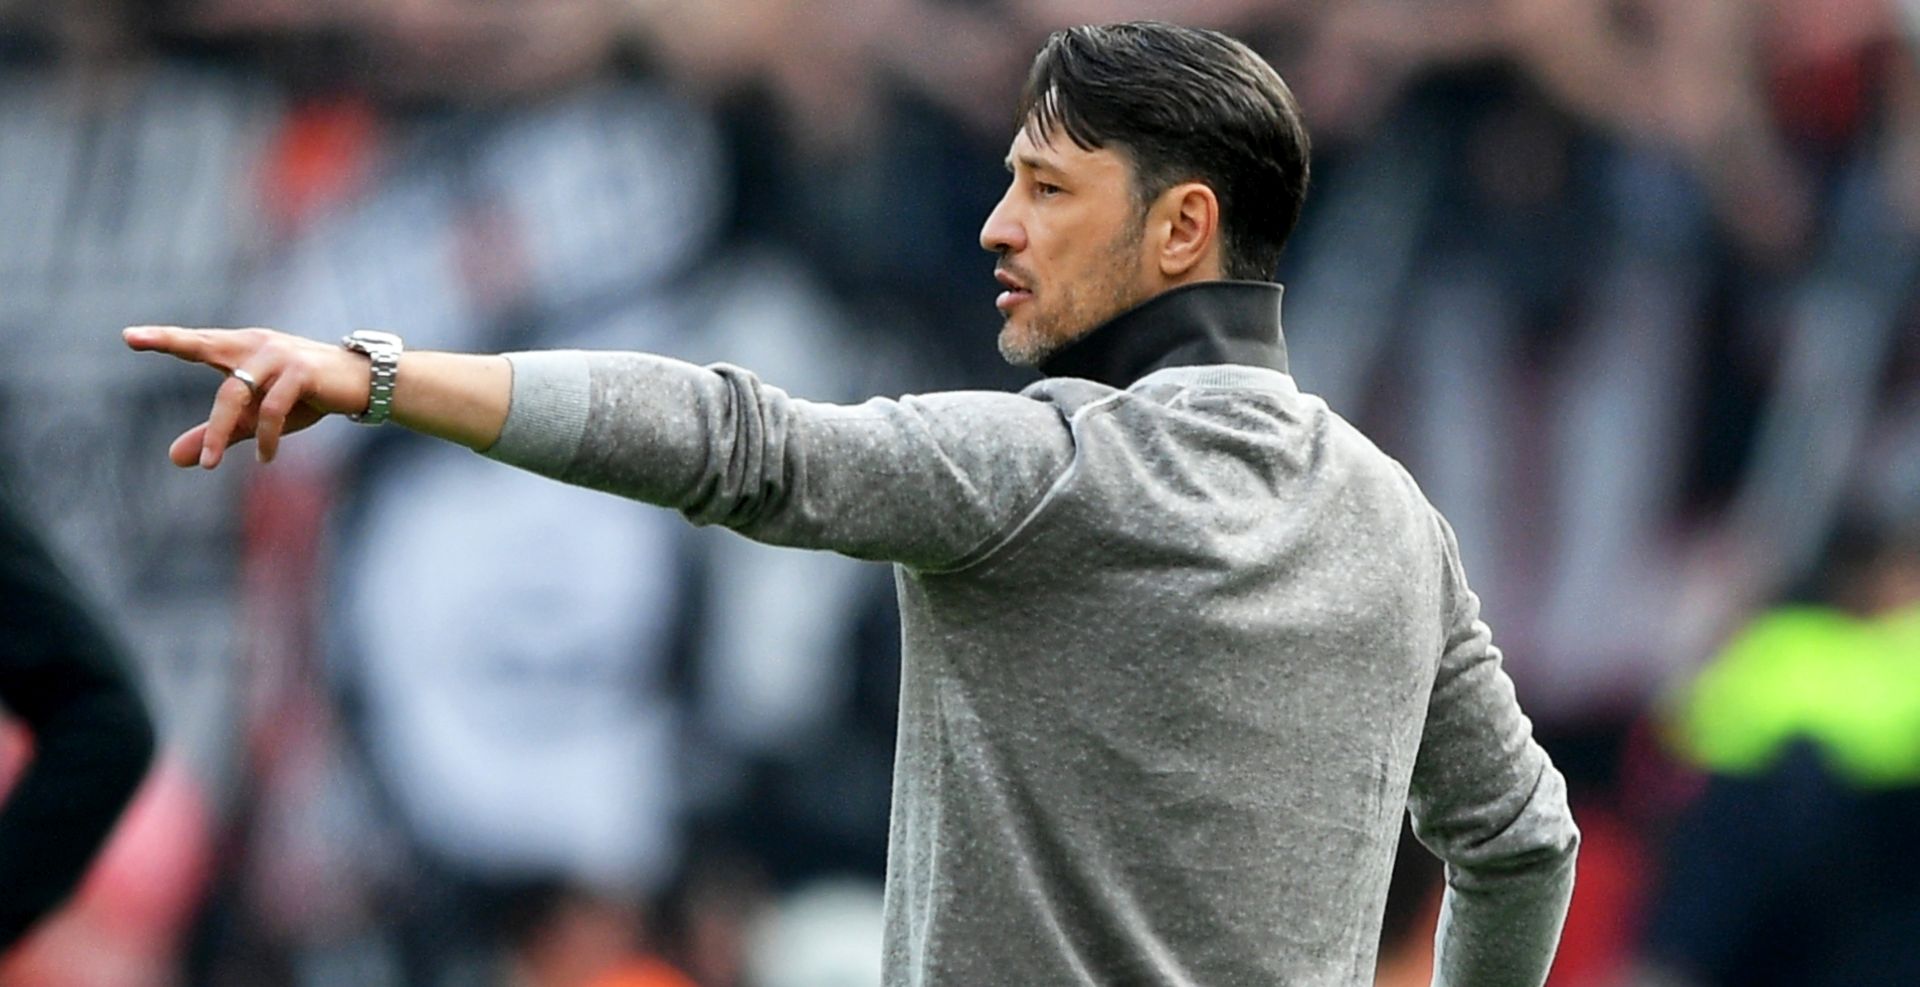 epa06669019 Eintracht Frankfurt's head coach Niko Kovac gestures during the German Bundesliga soccer match between Bayer Leverkusen and Eintracht Frankfurt in Leverkusen, Germany, 14 April 2018.  EPA/SASCHA STEINBACH EMBARGO CONDITIONS - ATTENTION: Due to the accreditation guidelines, the DFL only permits the publication and utilisation of up to 15 pictures per match on the internet and in online media during the match.